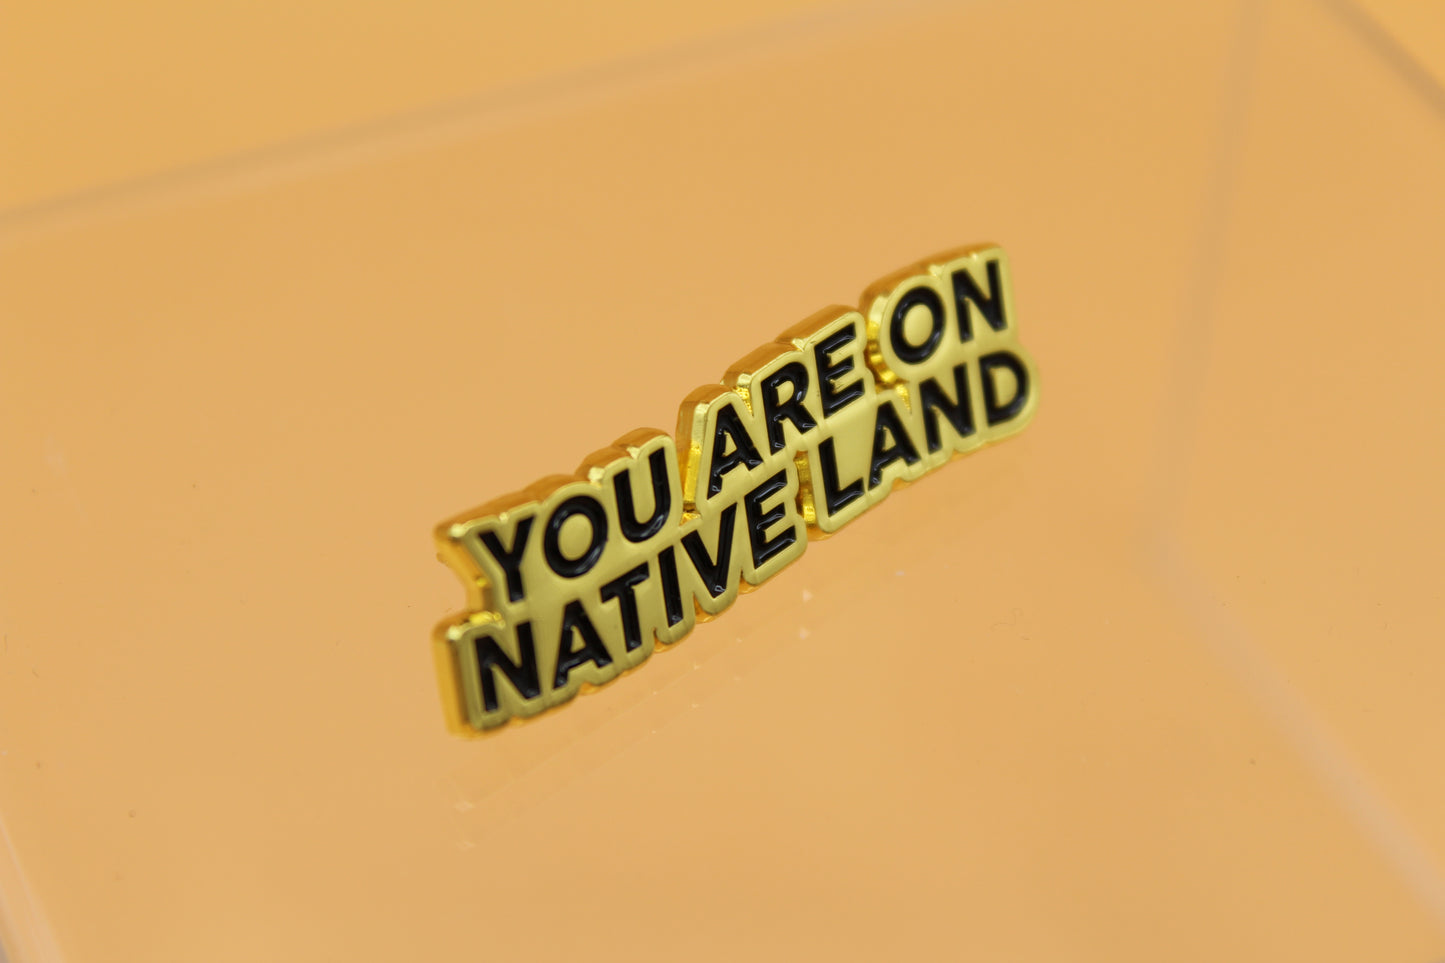 'YOU ARE ON NATIVE LAND' Pin | Gold